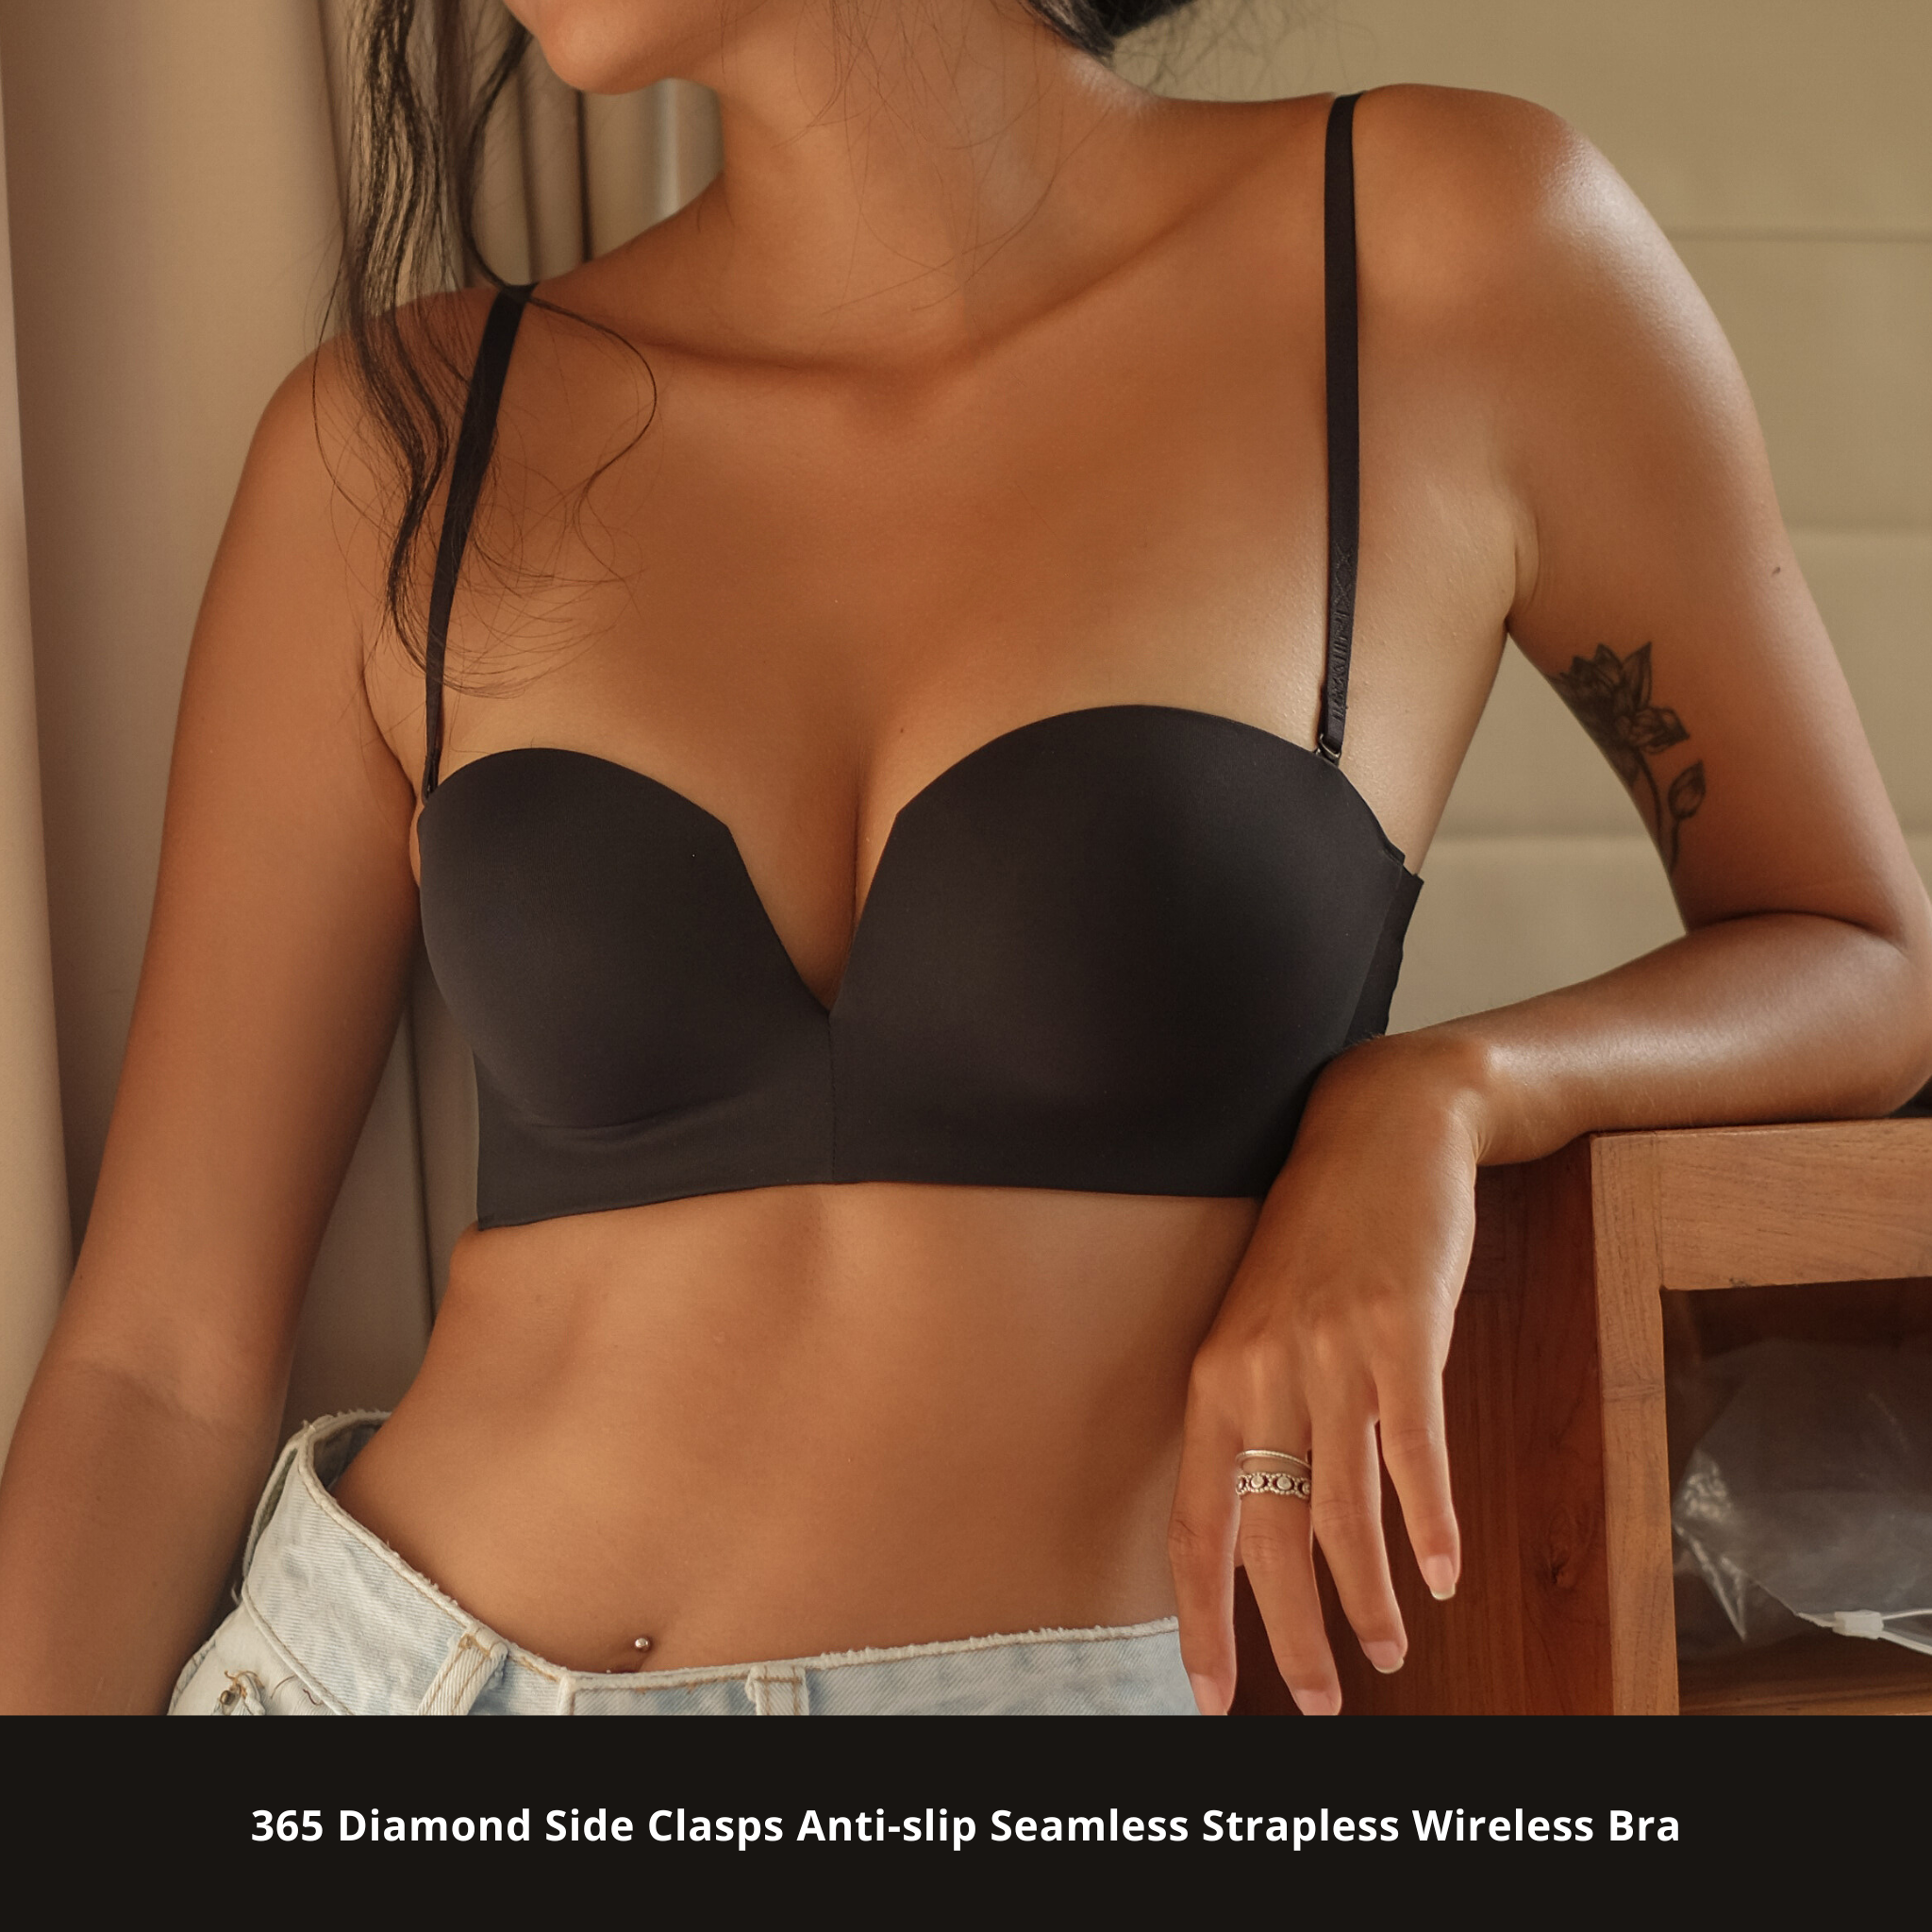 Guide to wearing the 365 Diamond Side Clasp Anti-Slip Seamless Straple